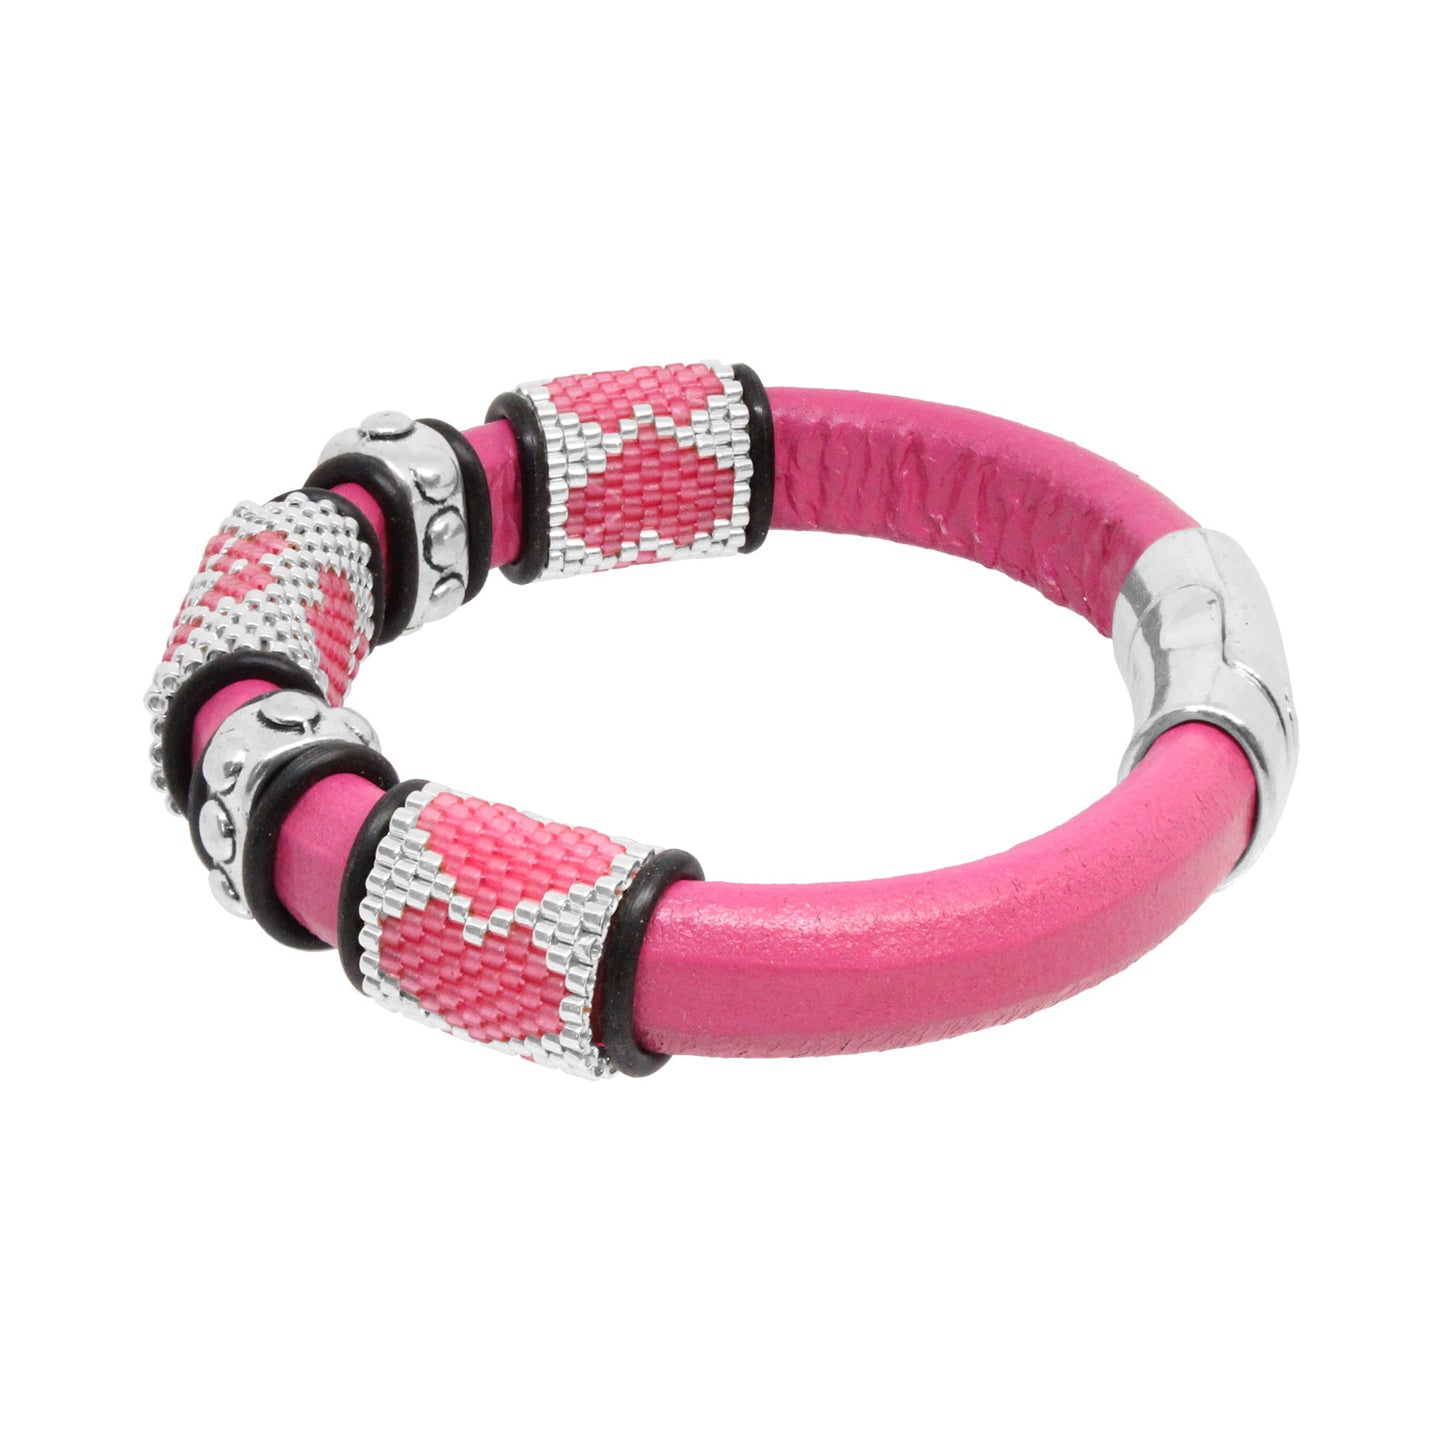 FUCHSIA PINK Dog Paw Bracelet / fits 6.5 to 7 Inch wrist size / leather with magnetic clasp